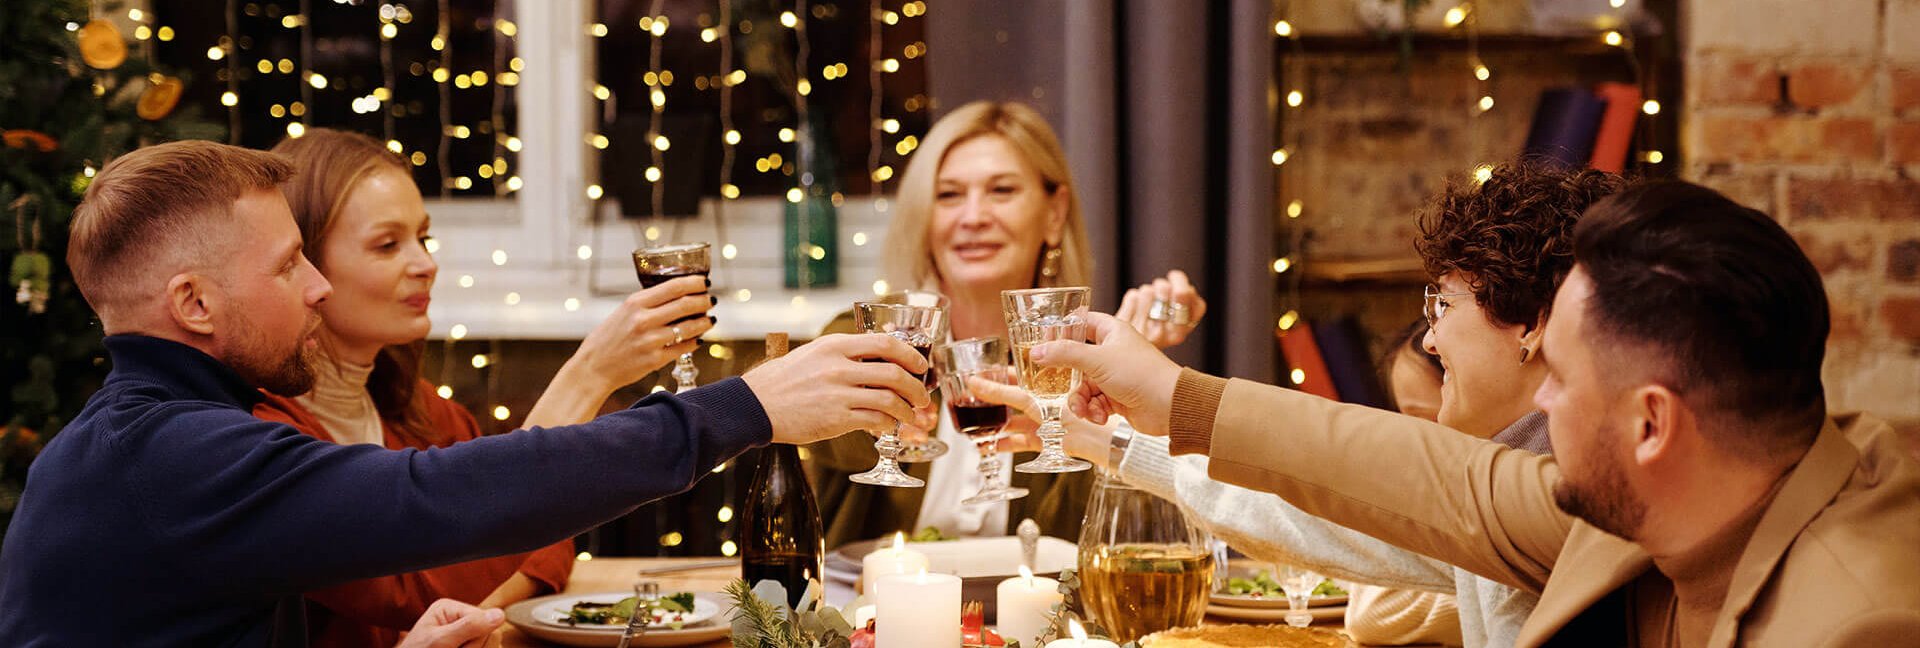 Hosting A Holiday Party In A Small Space: Tips To Save, 55% OFF